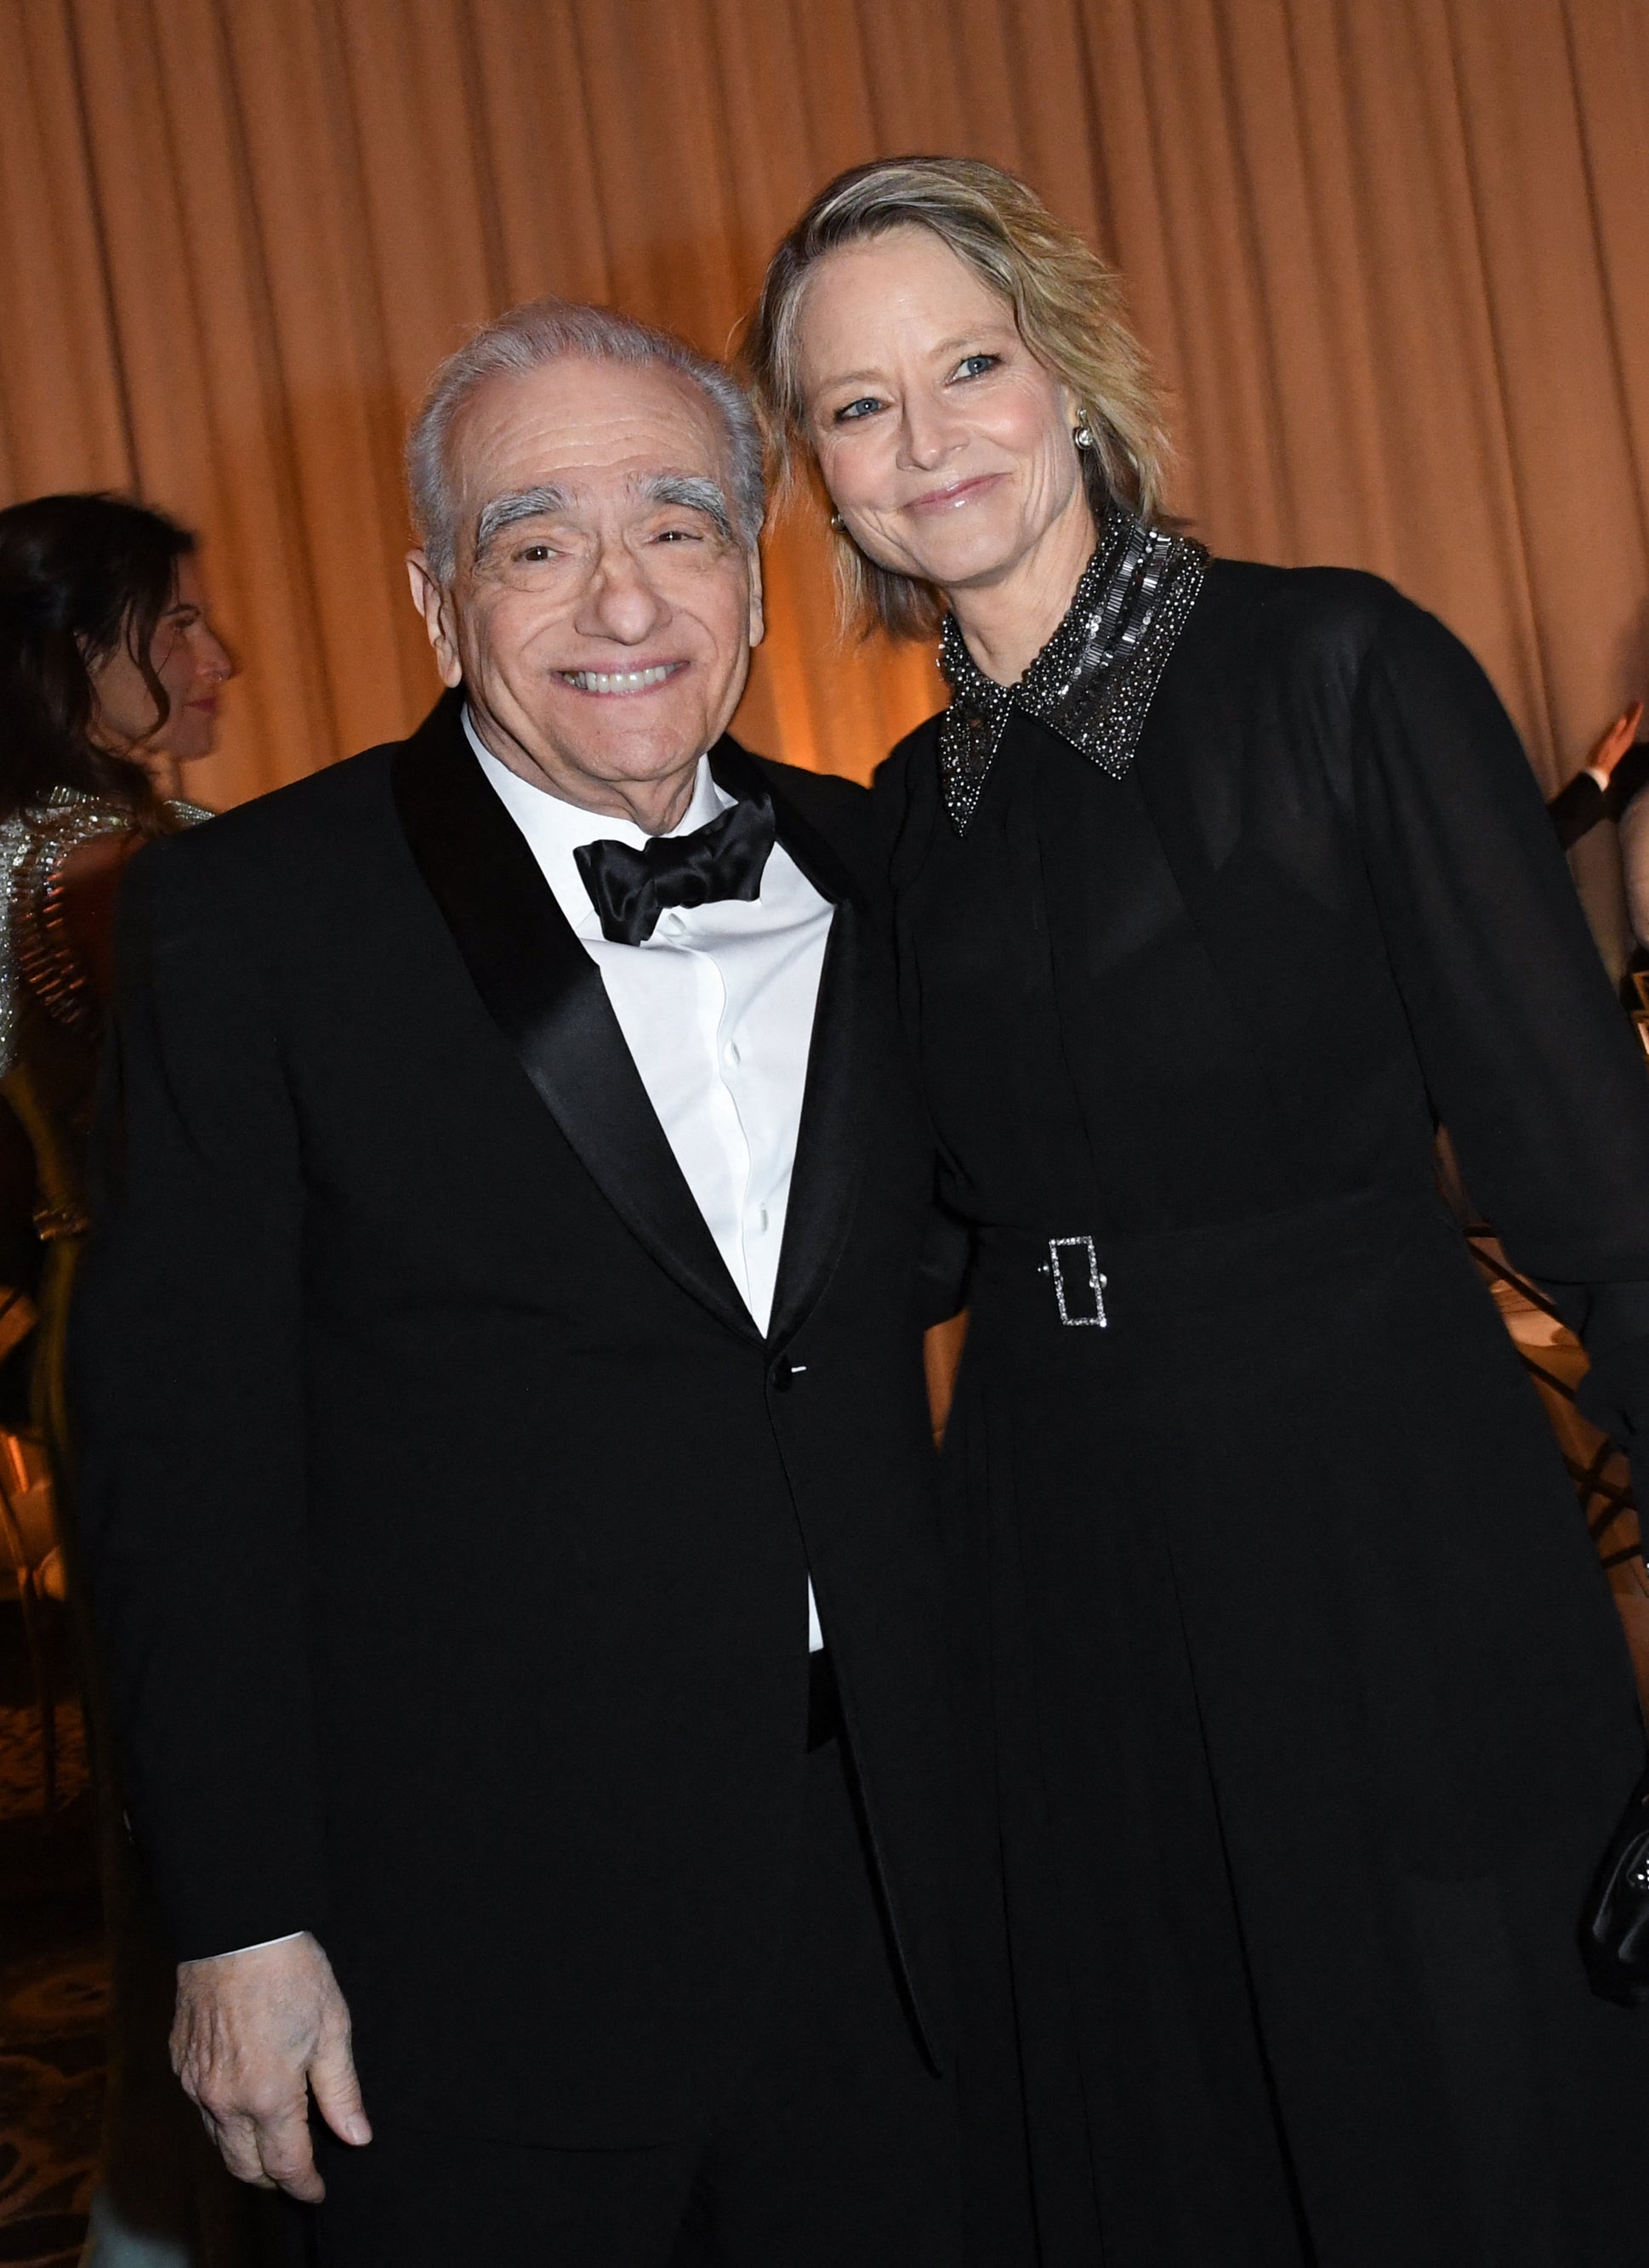 Martin Scorsese and Jodie Foster